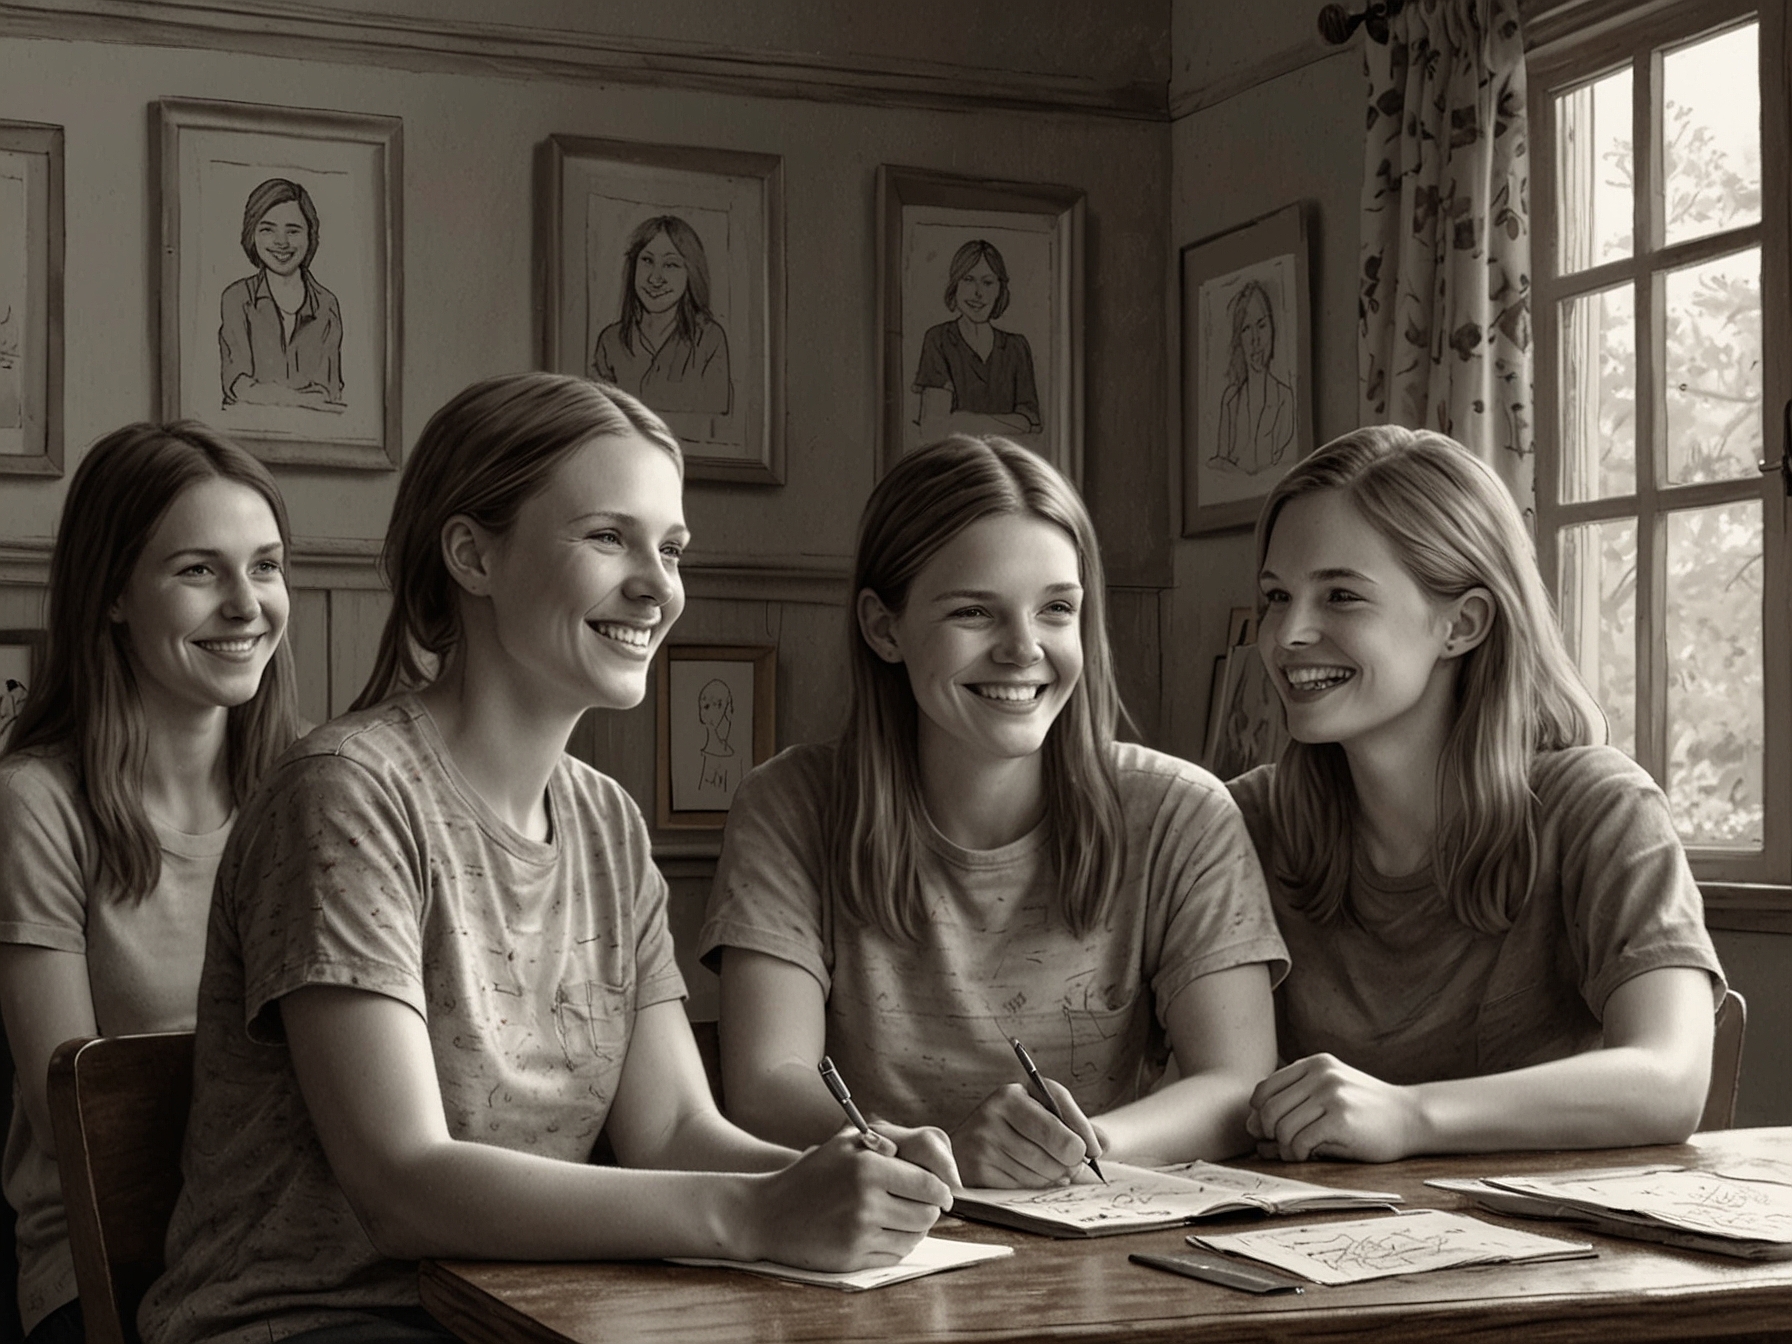 A heartwarming image showing Charlotte Chilton surrounded by supportive friends and family, emphasizing the importance of a strong support network during challenging times.